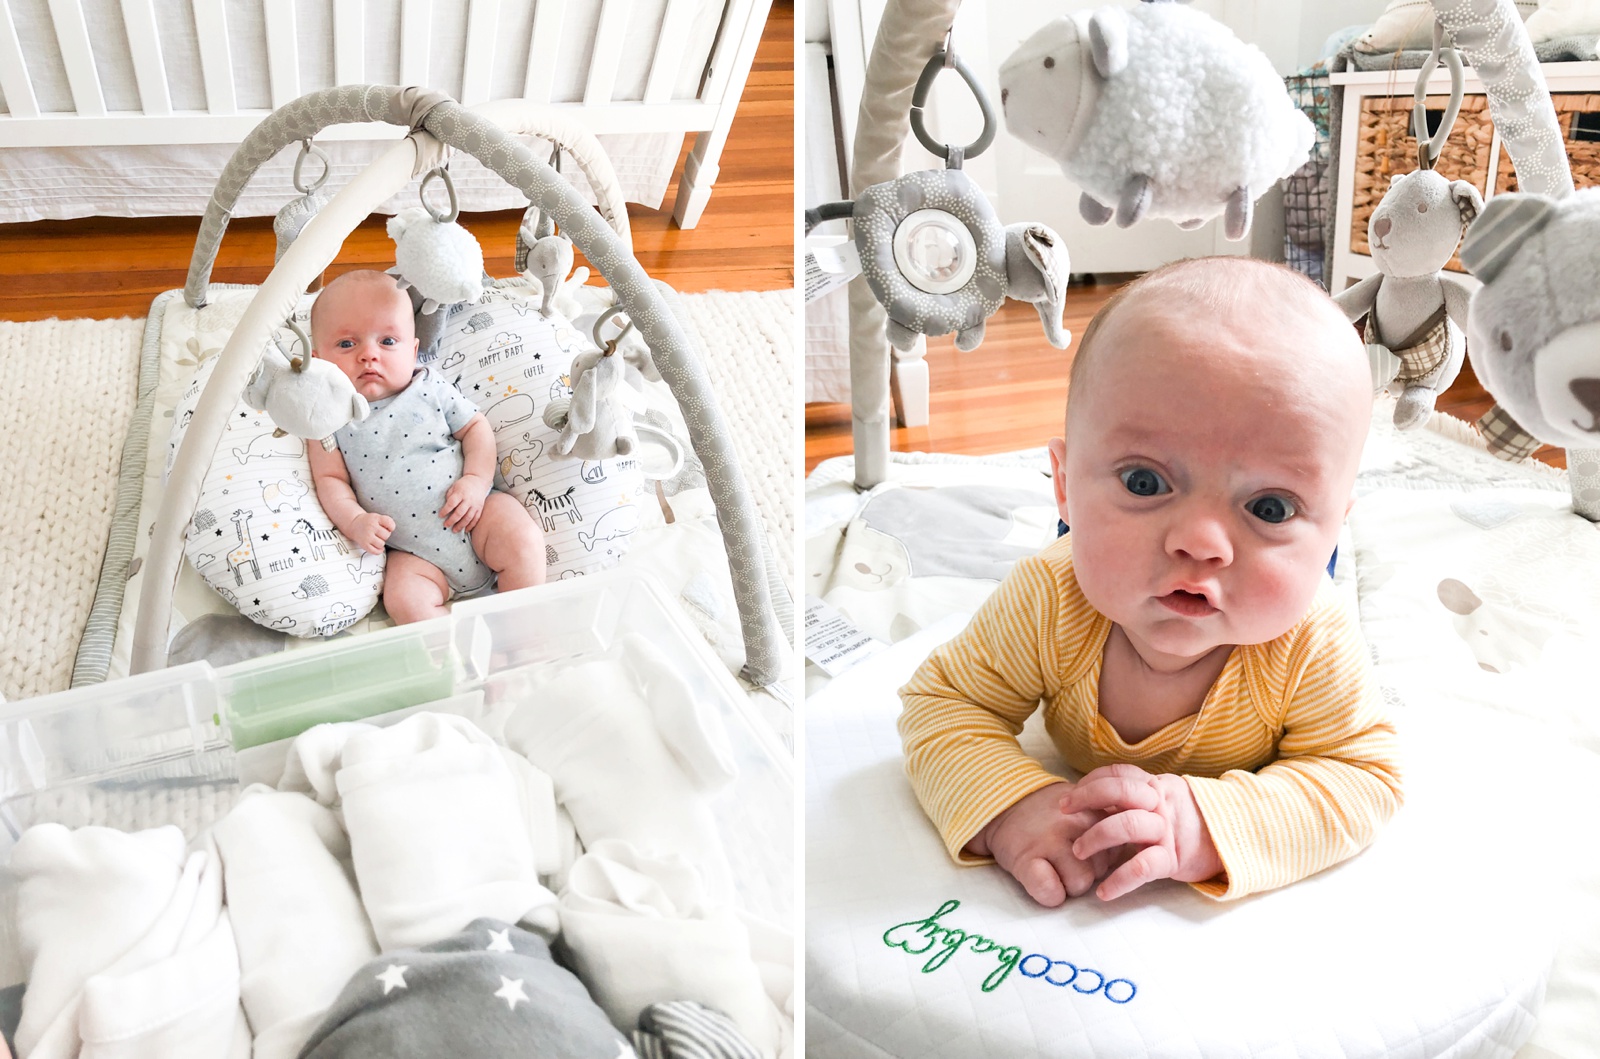 sweet-baby-james-allen-4-and-5-months-old-photo_7553.jpg